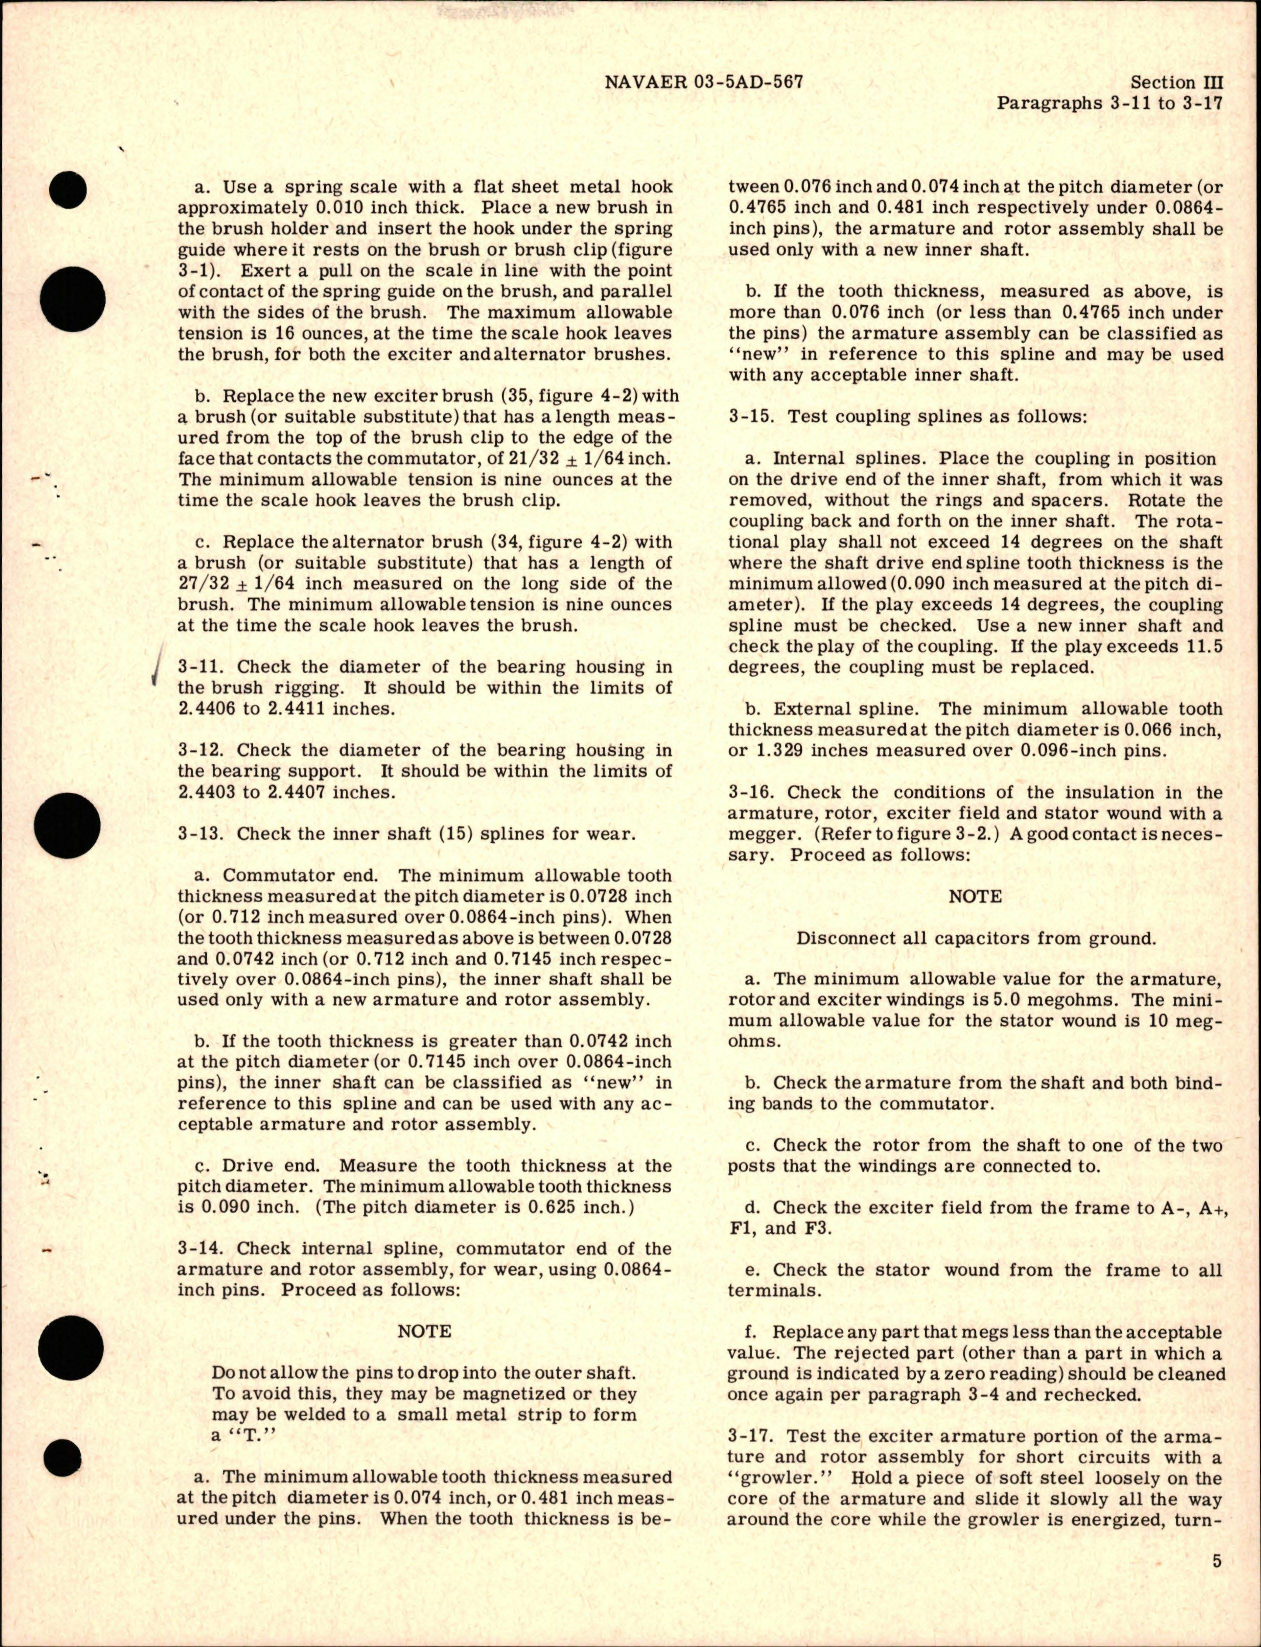 Sample page 9 from AirCorps Library document: Overhaul and Service Instructions for AC Generators 